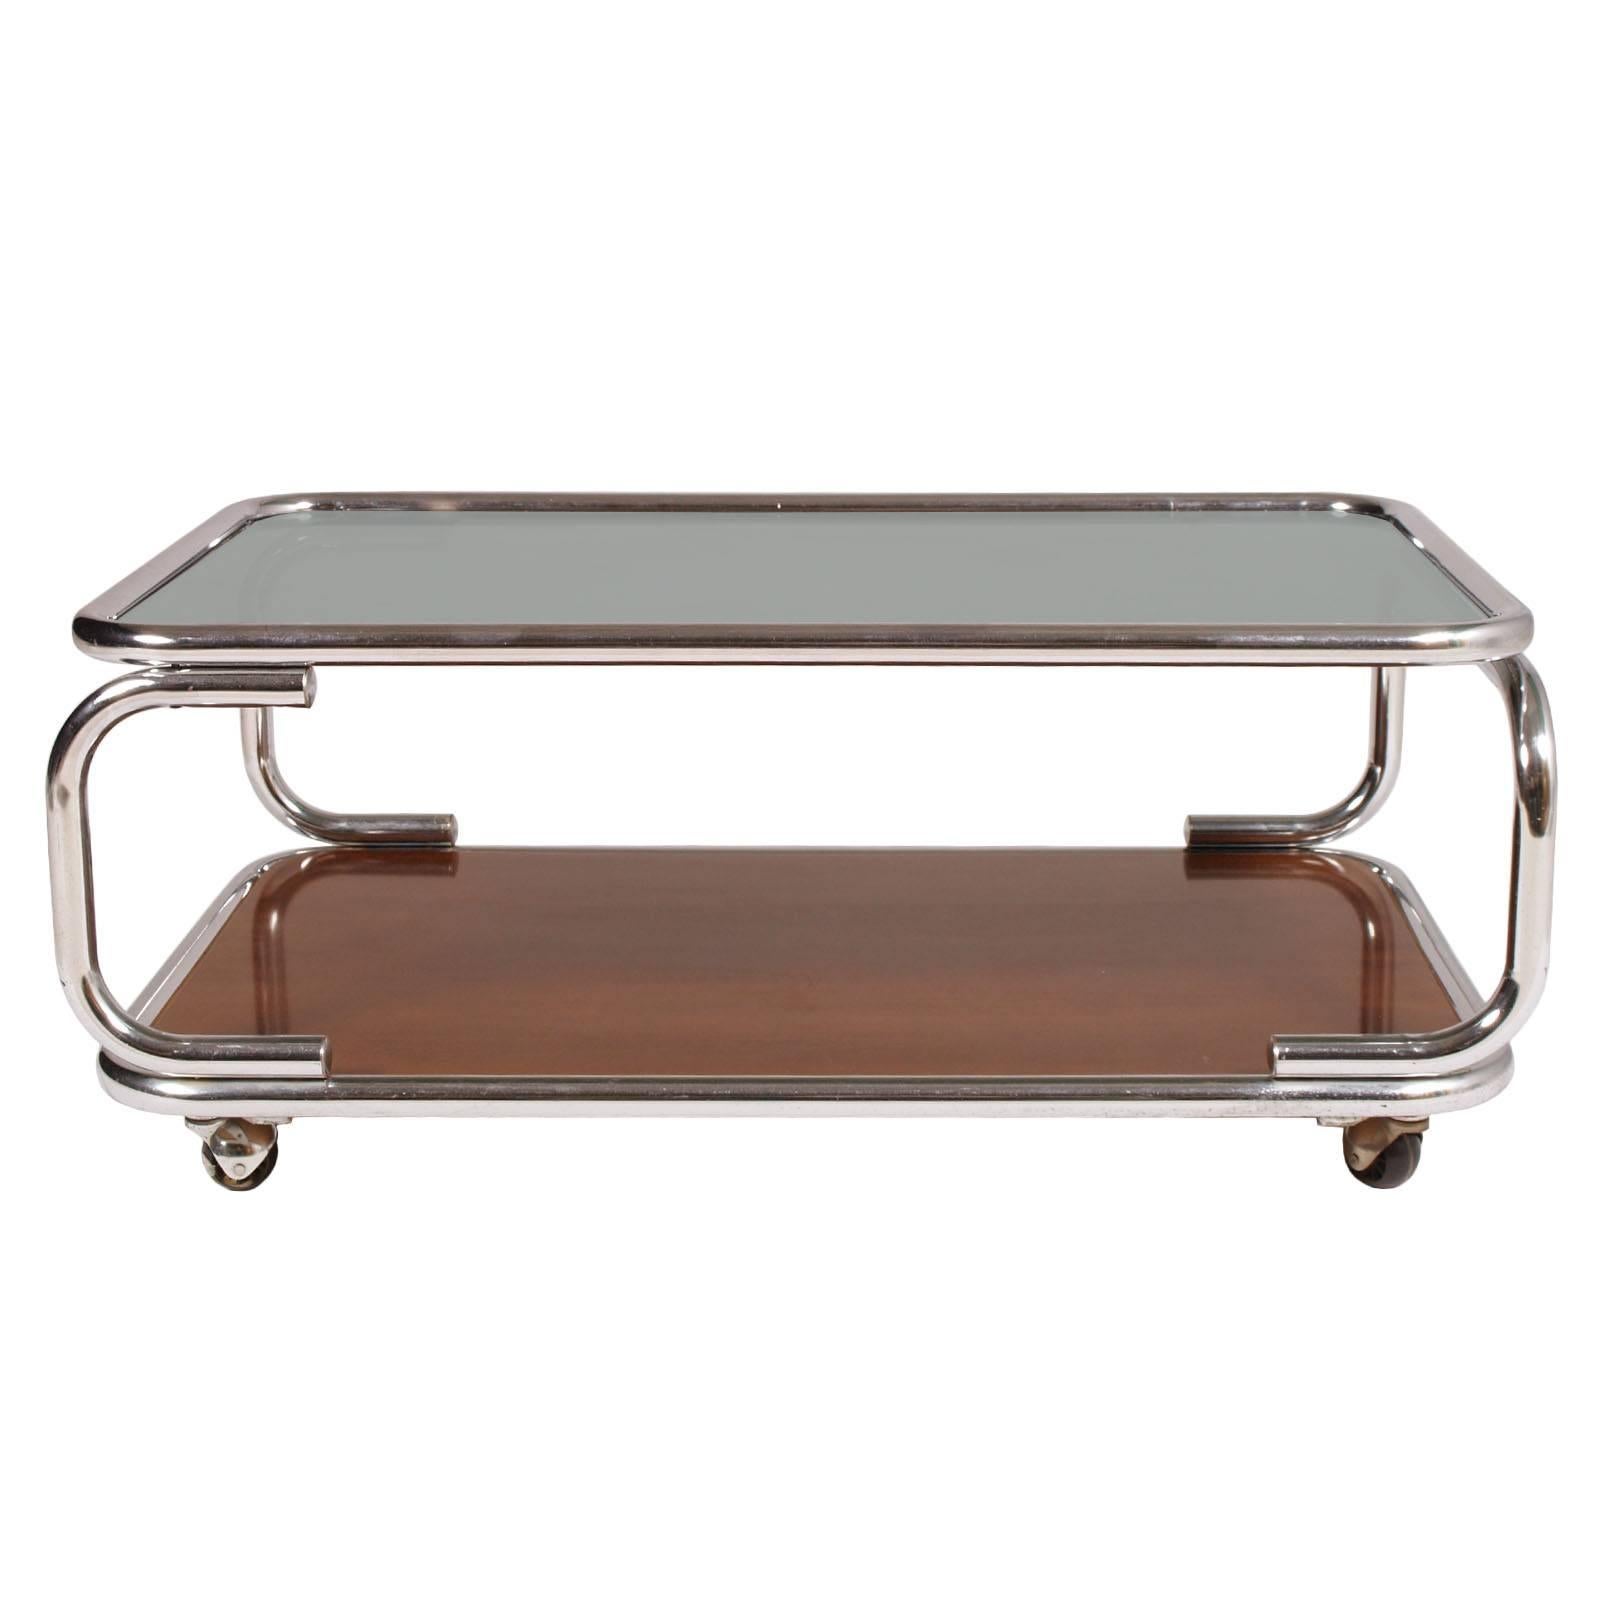 Mid-Century Modern Italy chrome serving trolley or coffee table, with smoked glass top with under faux laminated wood.